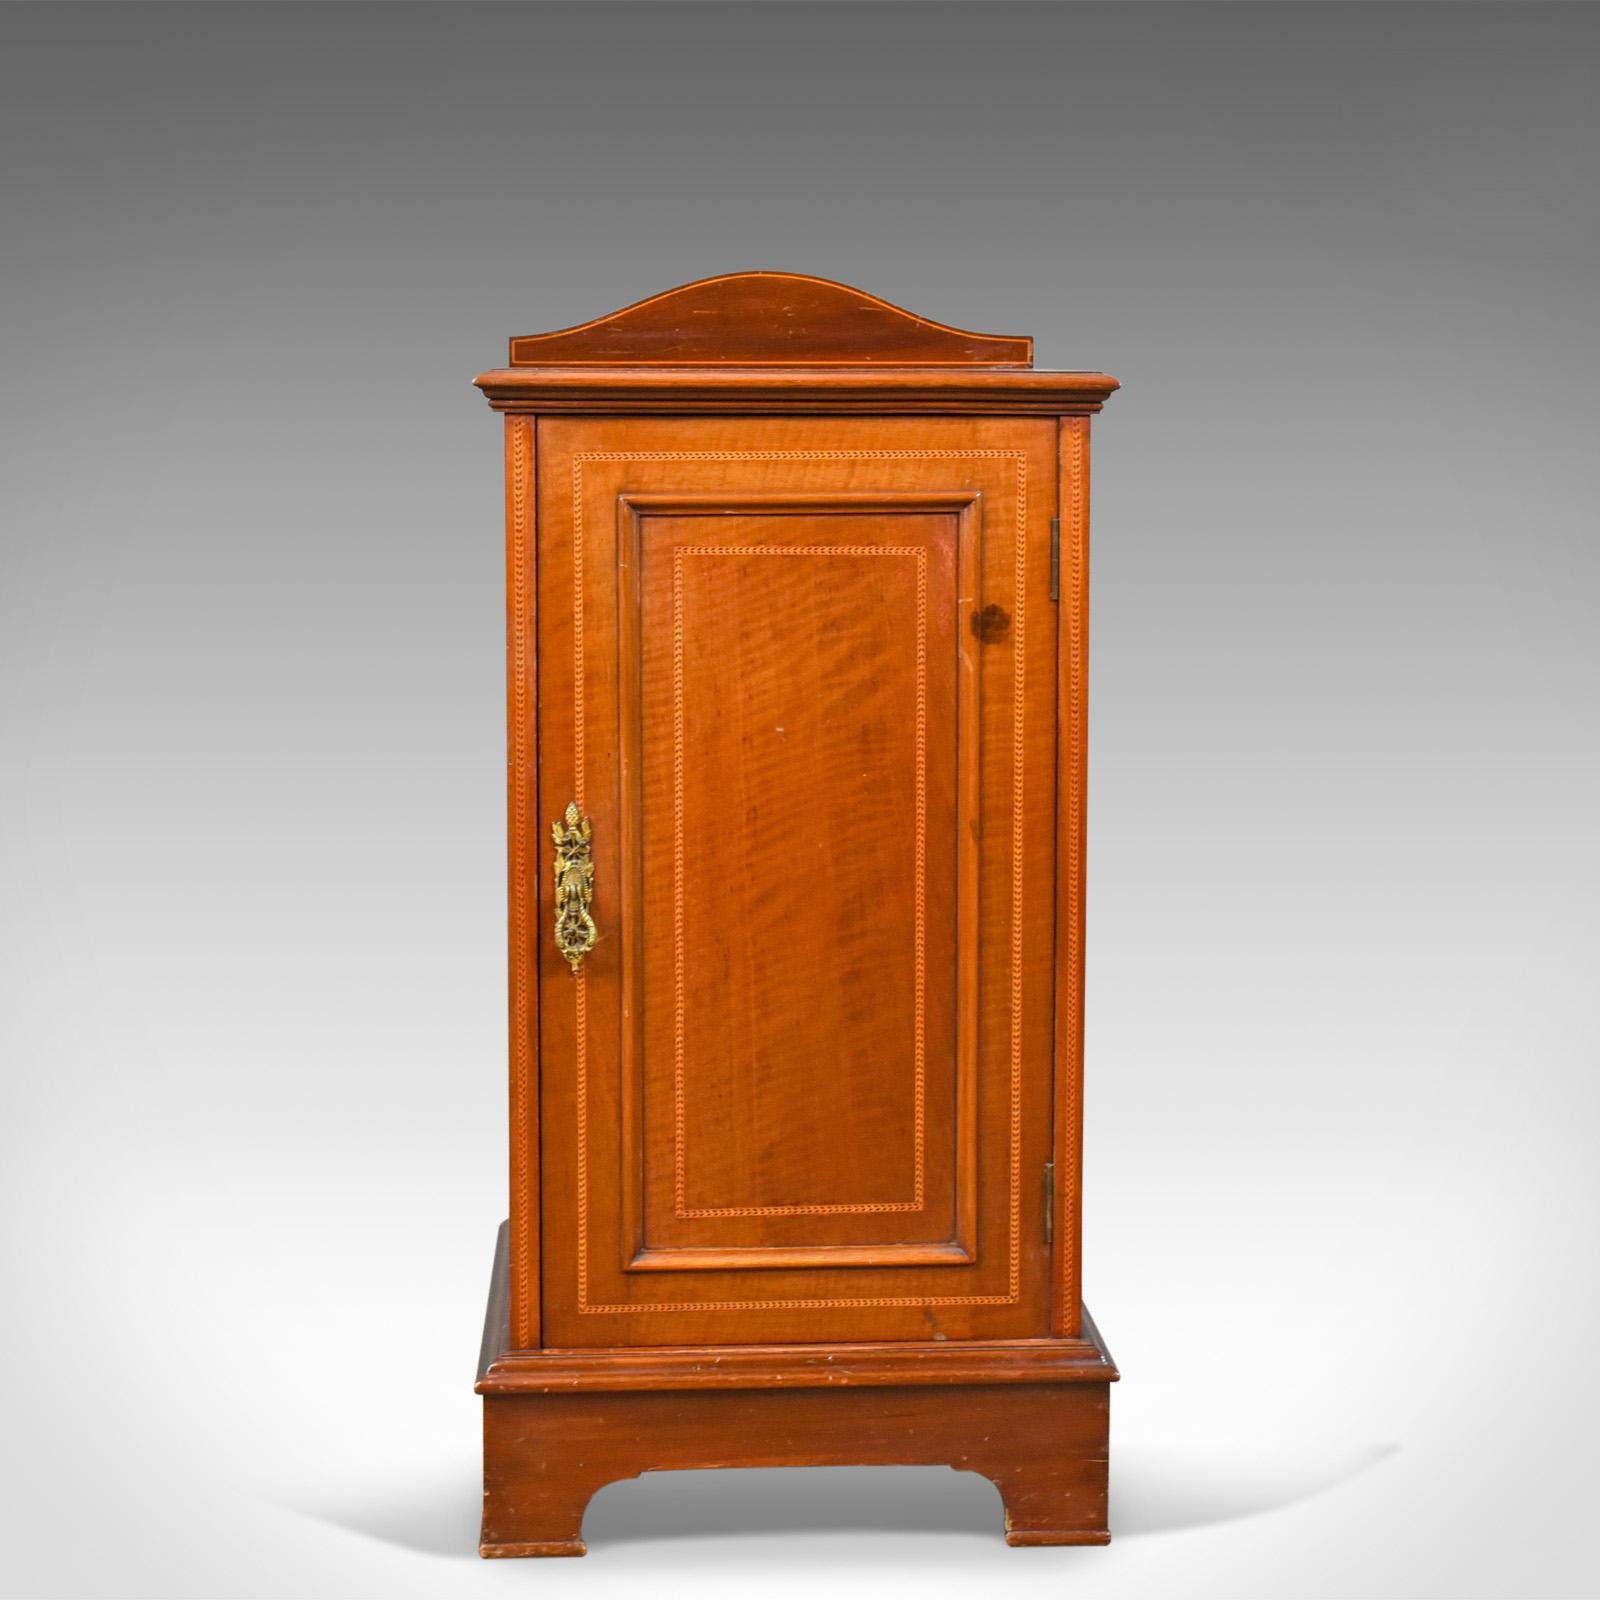 This is an antique pot cupboard, an English, Edwardian, walnut bedside cabinet dating to the early 20th century, circa 1910.

Good color to the English walnut
Grain interest shows in the lustrous wax polished finish
Of quality craftsmanship with